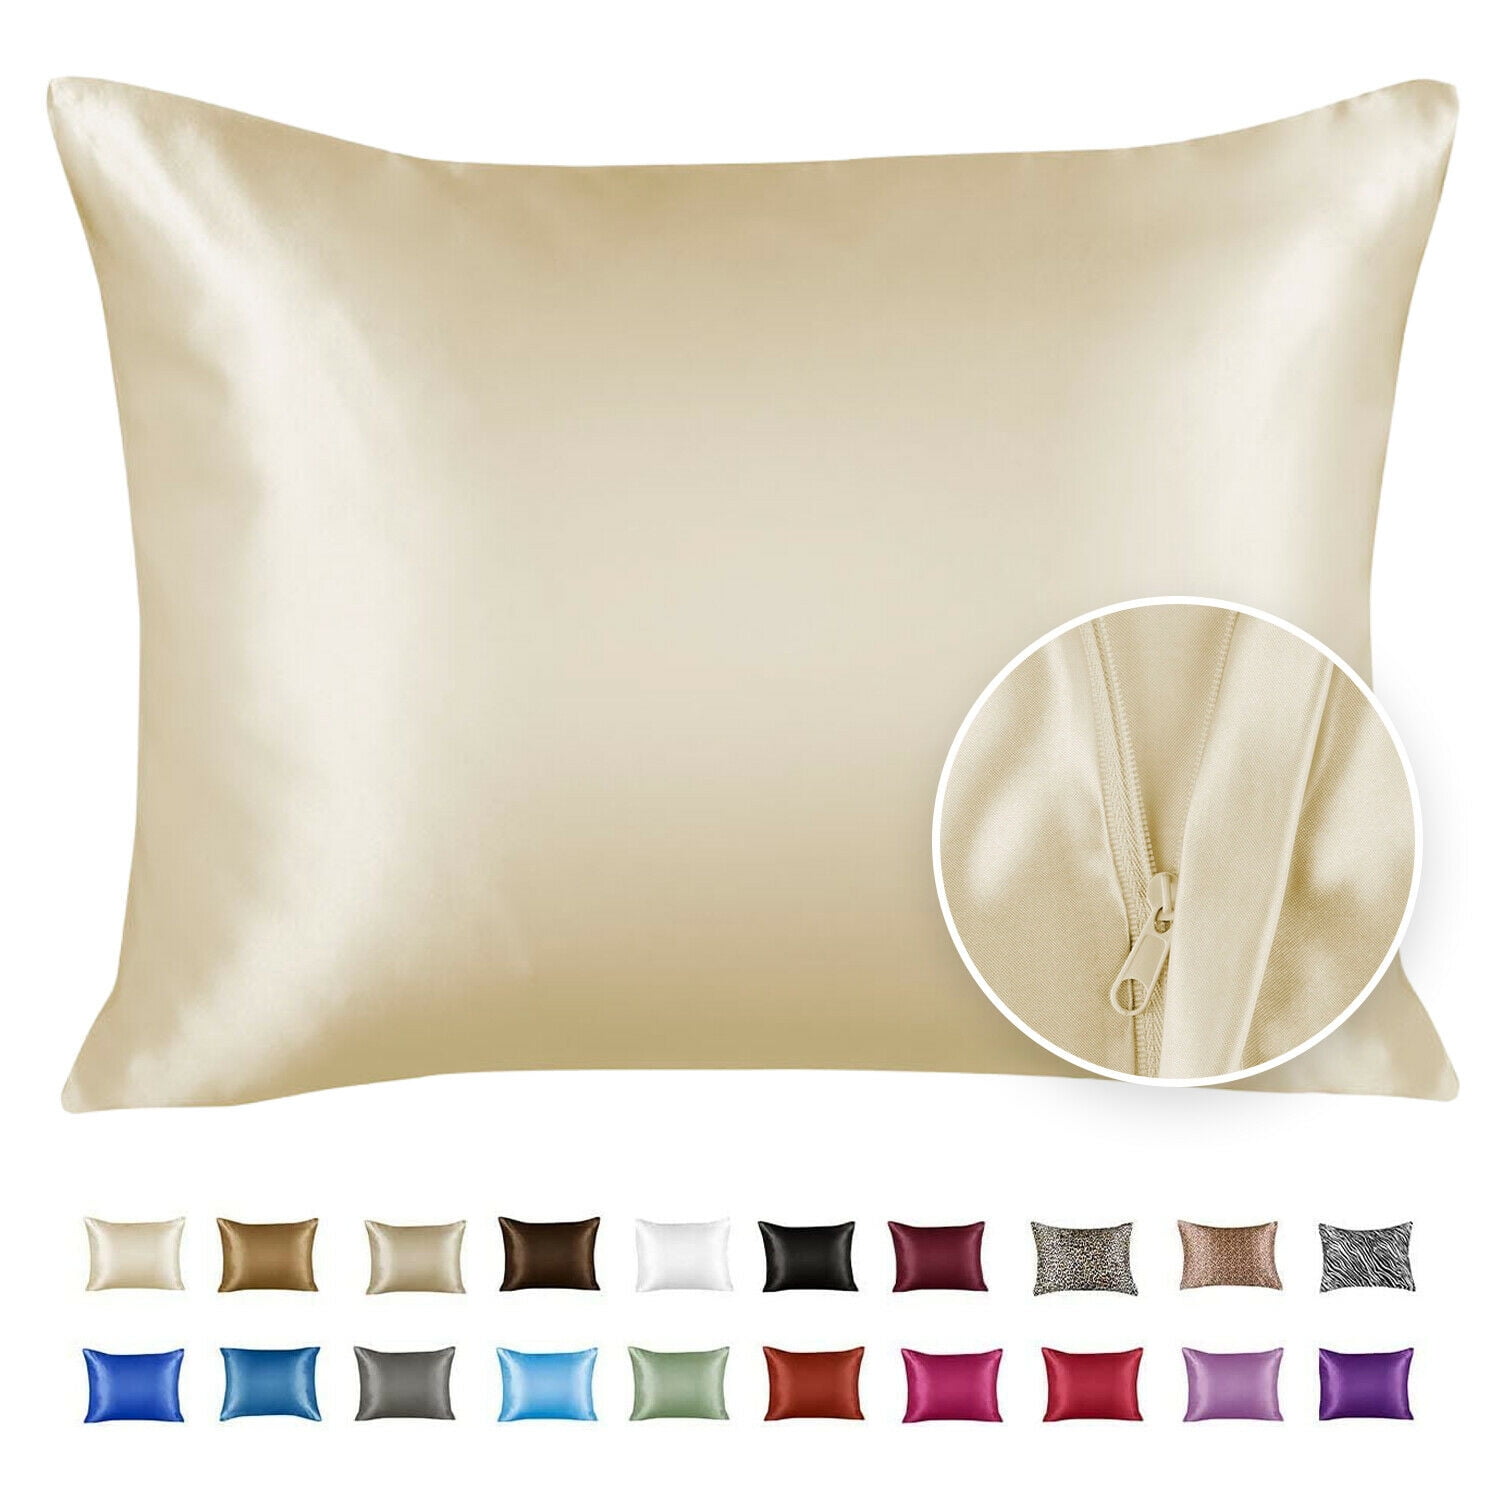 COVER SATEEN PILLOW CASE COFFEE BROWN 1 PAIR TWO SOFT "SILKY" SATIN KING 